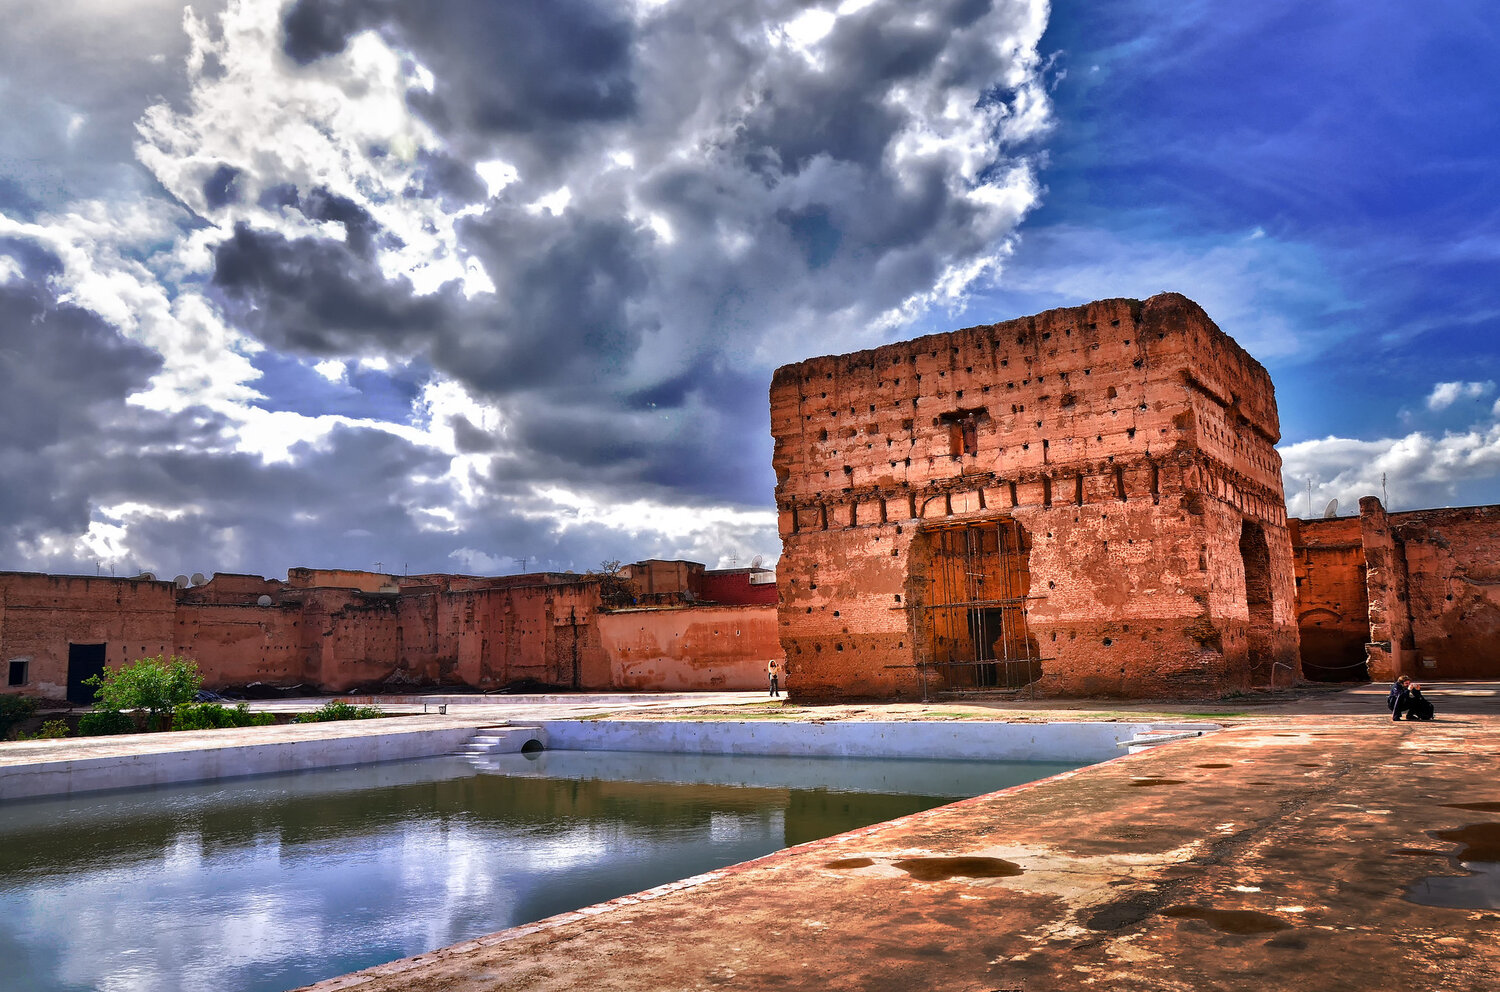 monuments to visit in Marrakech